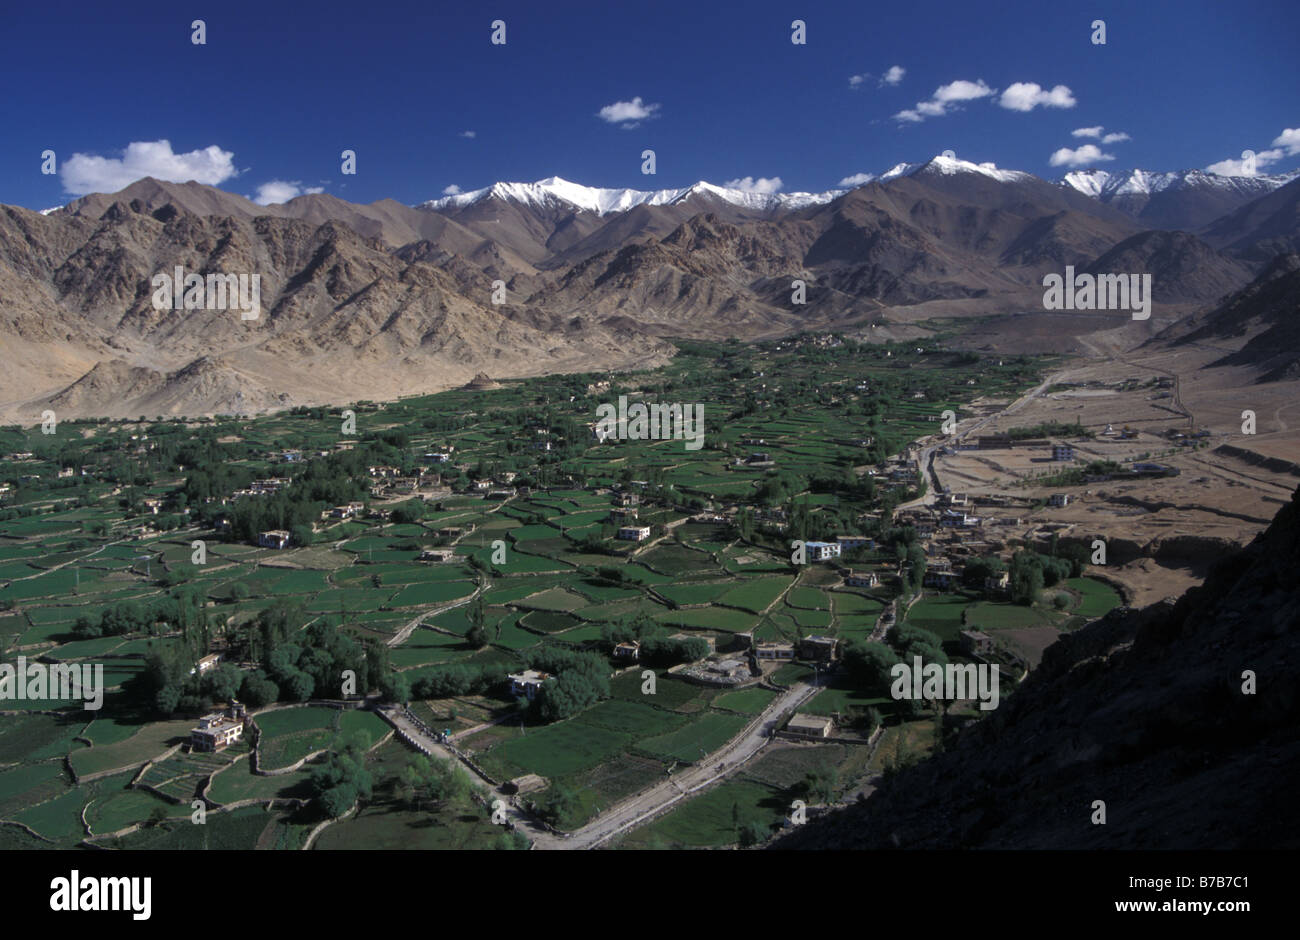 view over village fields in arid valley towards Sankar gompa from Namgyal Tsemo gompa Leh Ladakh Jammu and Kashmir India Stock Photo